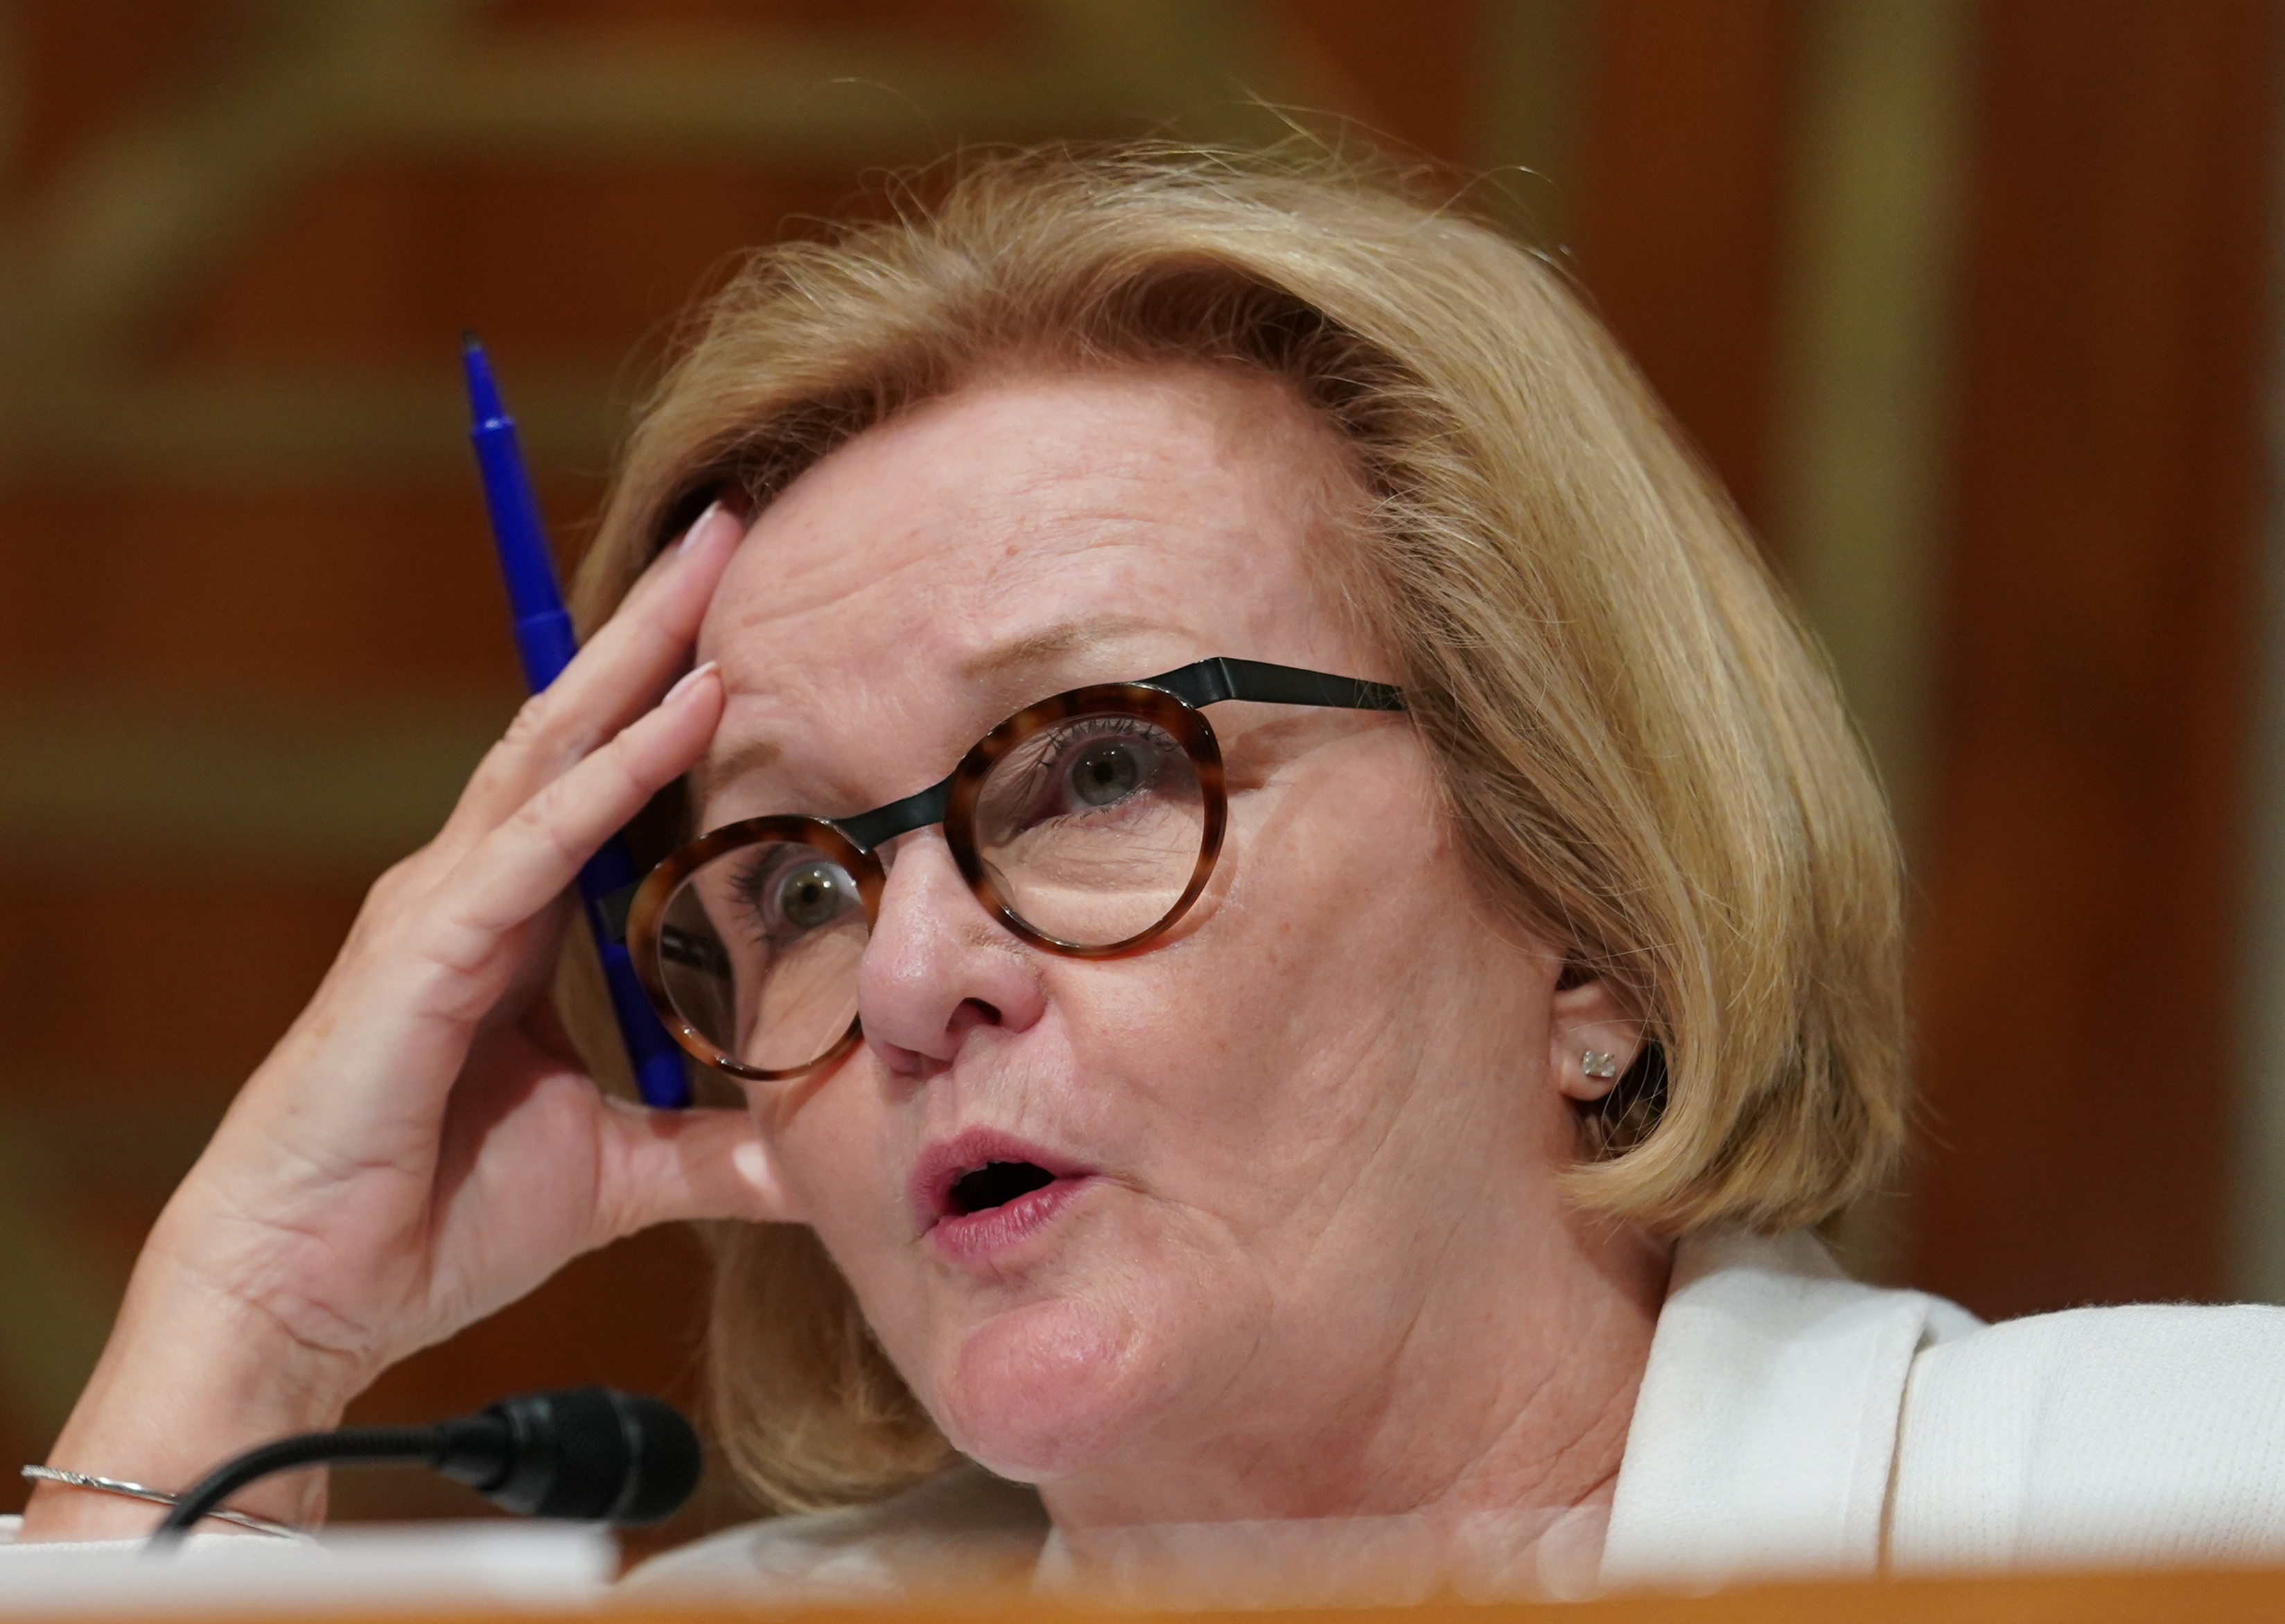 Senate Homeland Security and Governmental Affairs Committee ranking member Claire McCaskill (D-MO) questions Department of Homeland Security Secretary Kirstjen Nielsen during a Senate Homeland Security and Governmental Affairs Committee hearing on "Authorities and Resources Needed to Protect and Secure the United States," on Capitol Hill in Washington, DC, U.S., May 15, 2018. REUTERS/Erin Schaff